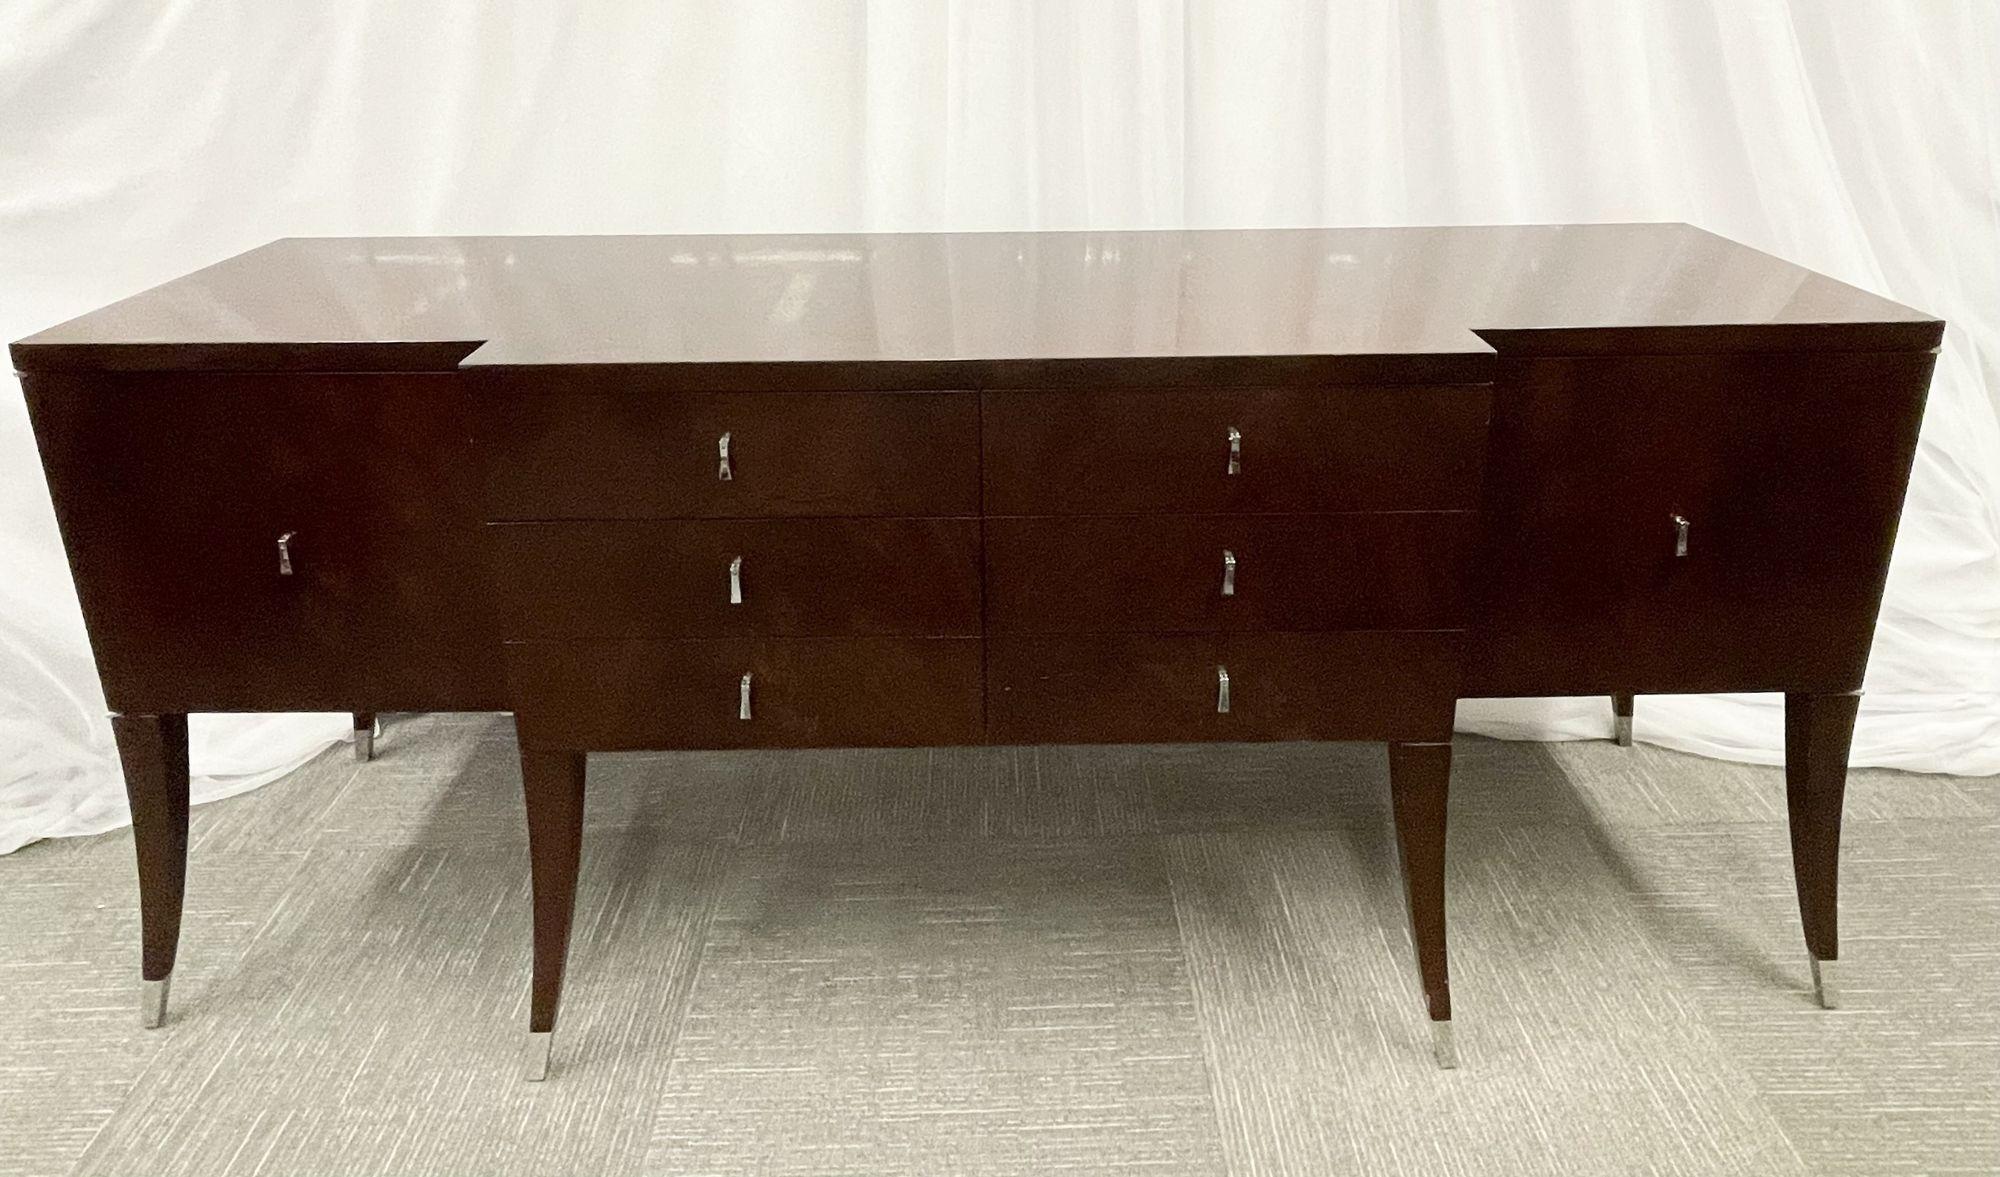 A flame Mahogany sideboard by Decca for Bolier
 
A Fine custom quality flame mahogany sideboard having 3 x 3 center drawers flanked by open square doors which contain two shelves each. On each side of the cabinet a 14